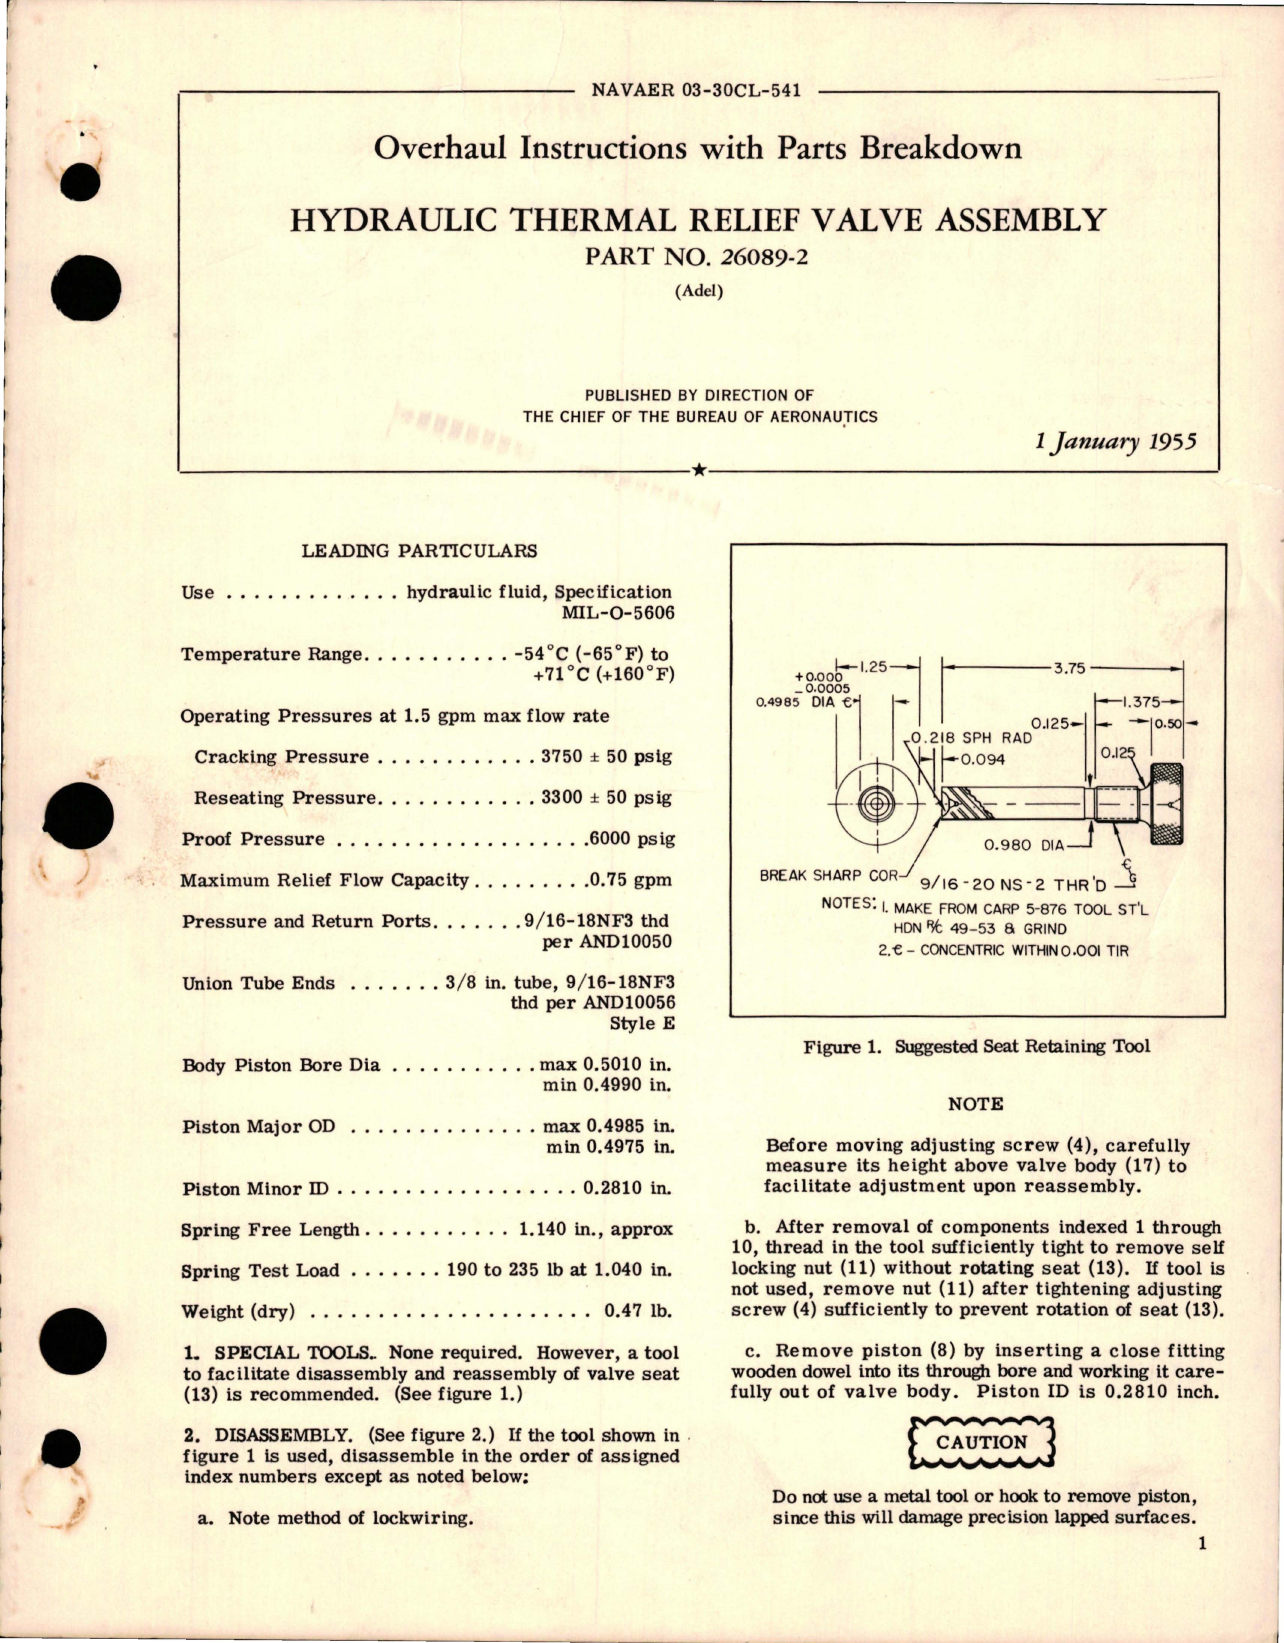 Sample page 1 from AirCorps Library document: Overhaul Instructions with Parts for Hydraulic Thermal Relief Valve Assembly - Part 26089-2 